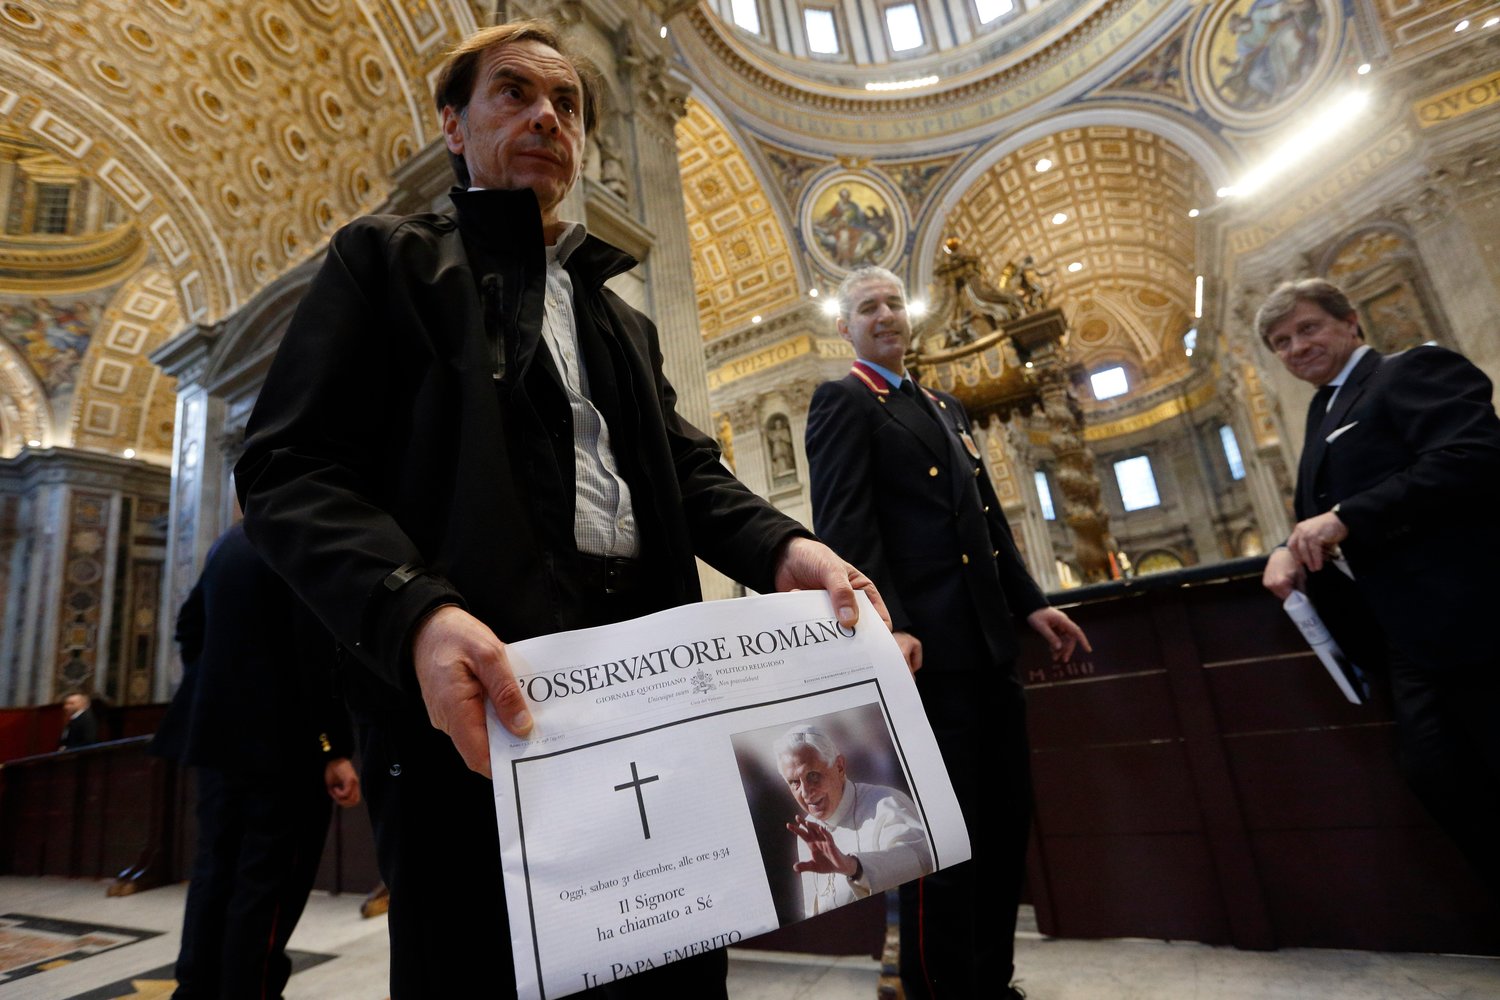 A man holds a copy of the Vatican's L'Osservatore Romano newspaper announcing the death of Pope Benedict XVI, in St. Peter's Basilica at the Vatican Dec. 31, 2022. Pope Benedict died at the age of 95 in his residence at the Vatican. (CNS photo/Paul Haring)